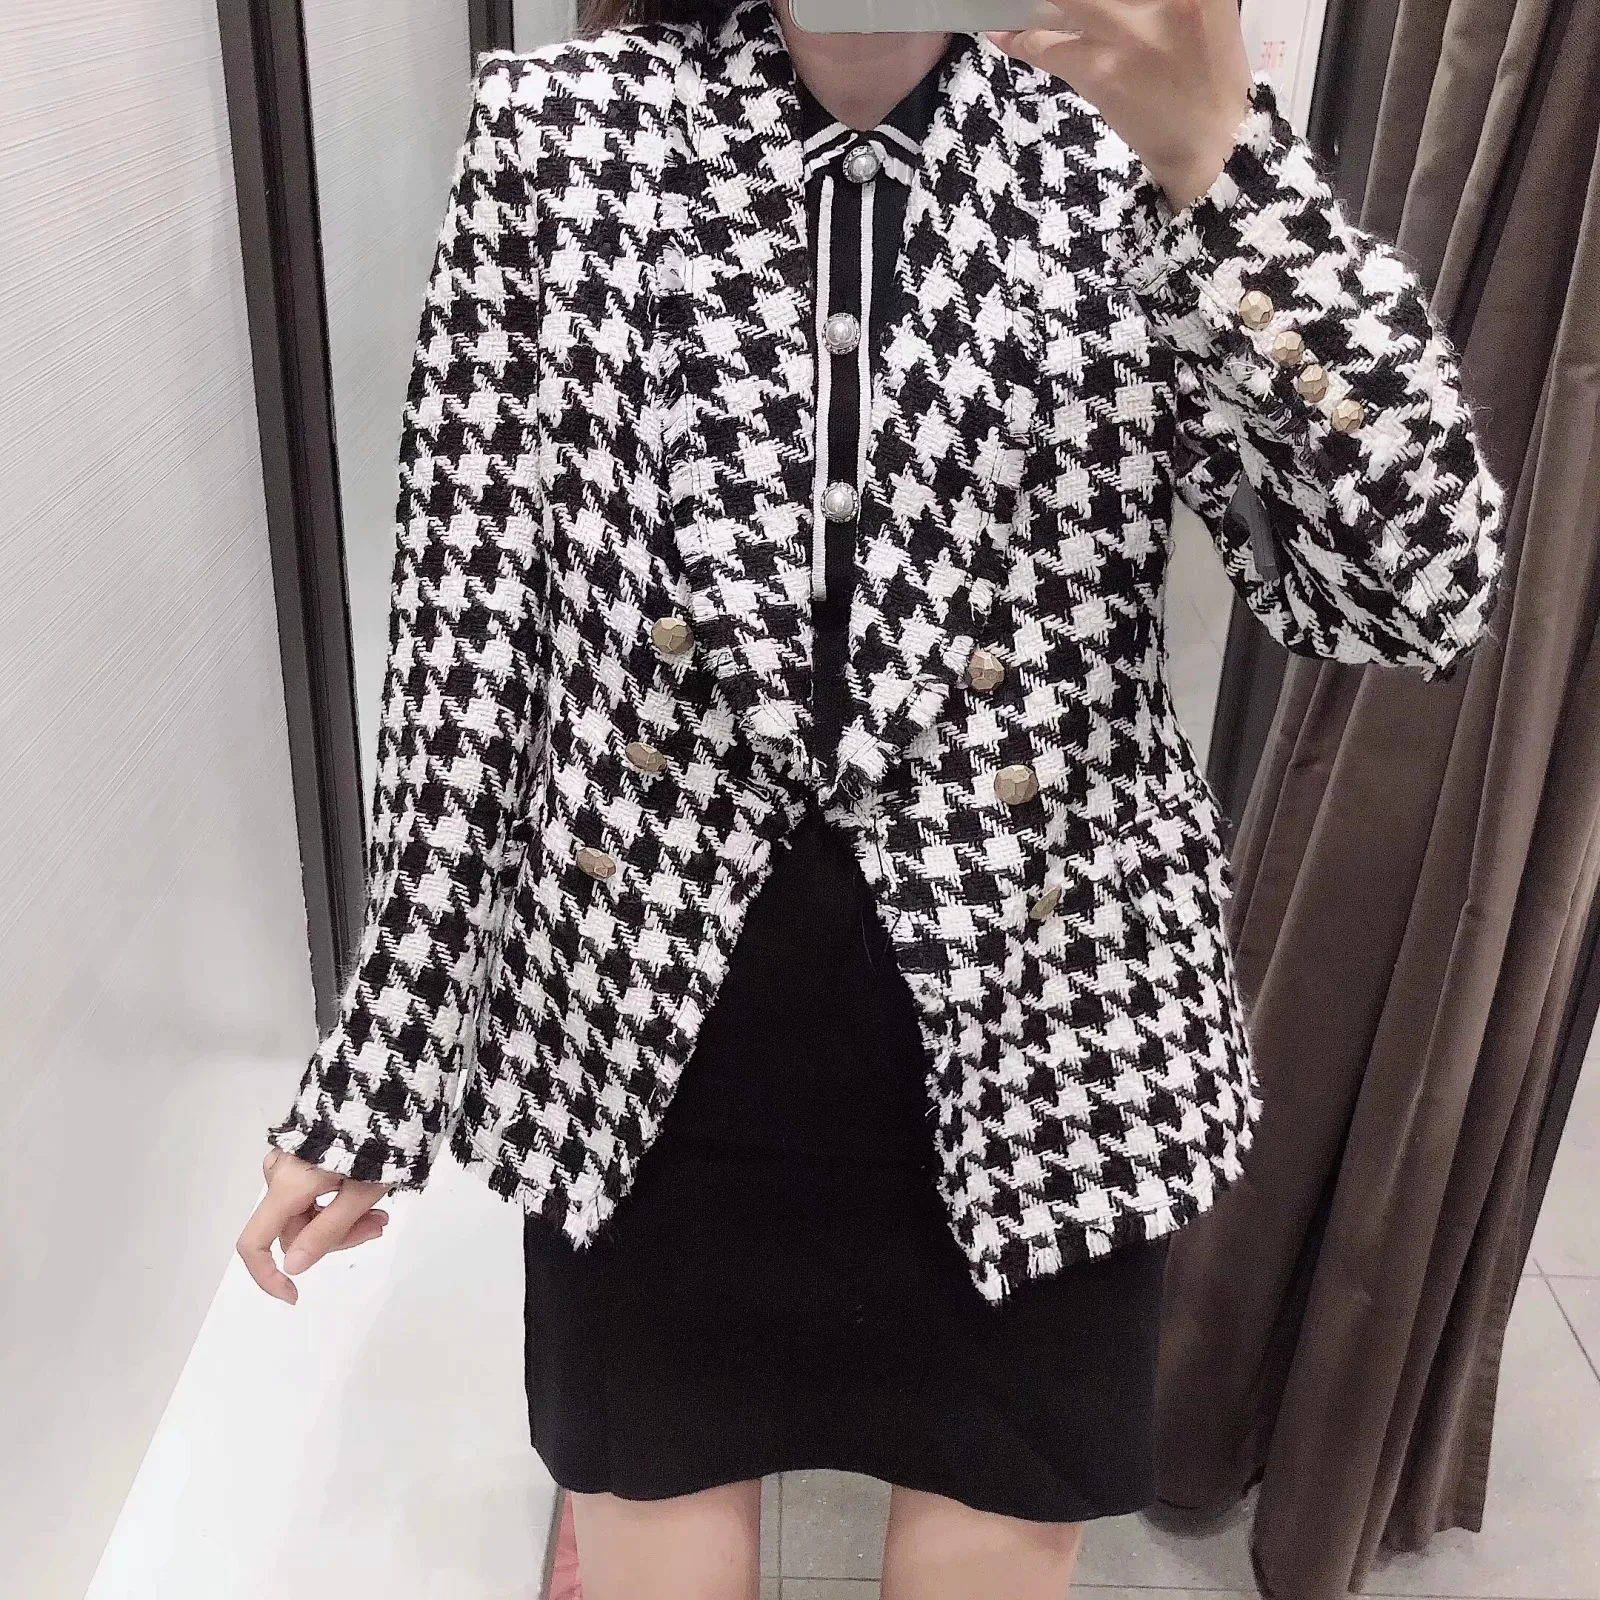 

Black Jacket for Women Vintage Plaid Autumn Winter Coats Tassel Houndstooth Jacket Chic Thick Tweed with Spliced Patch Designs